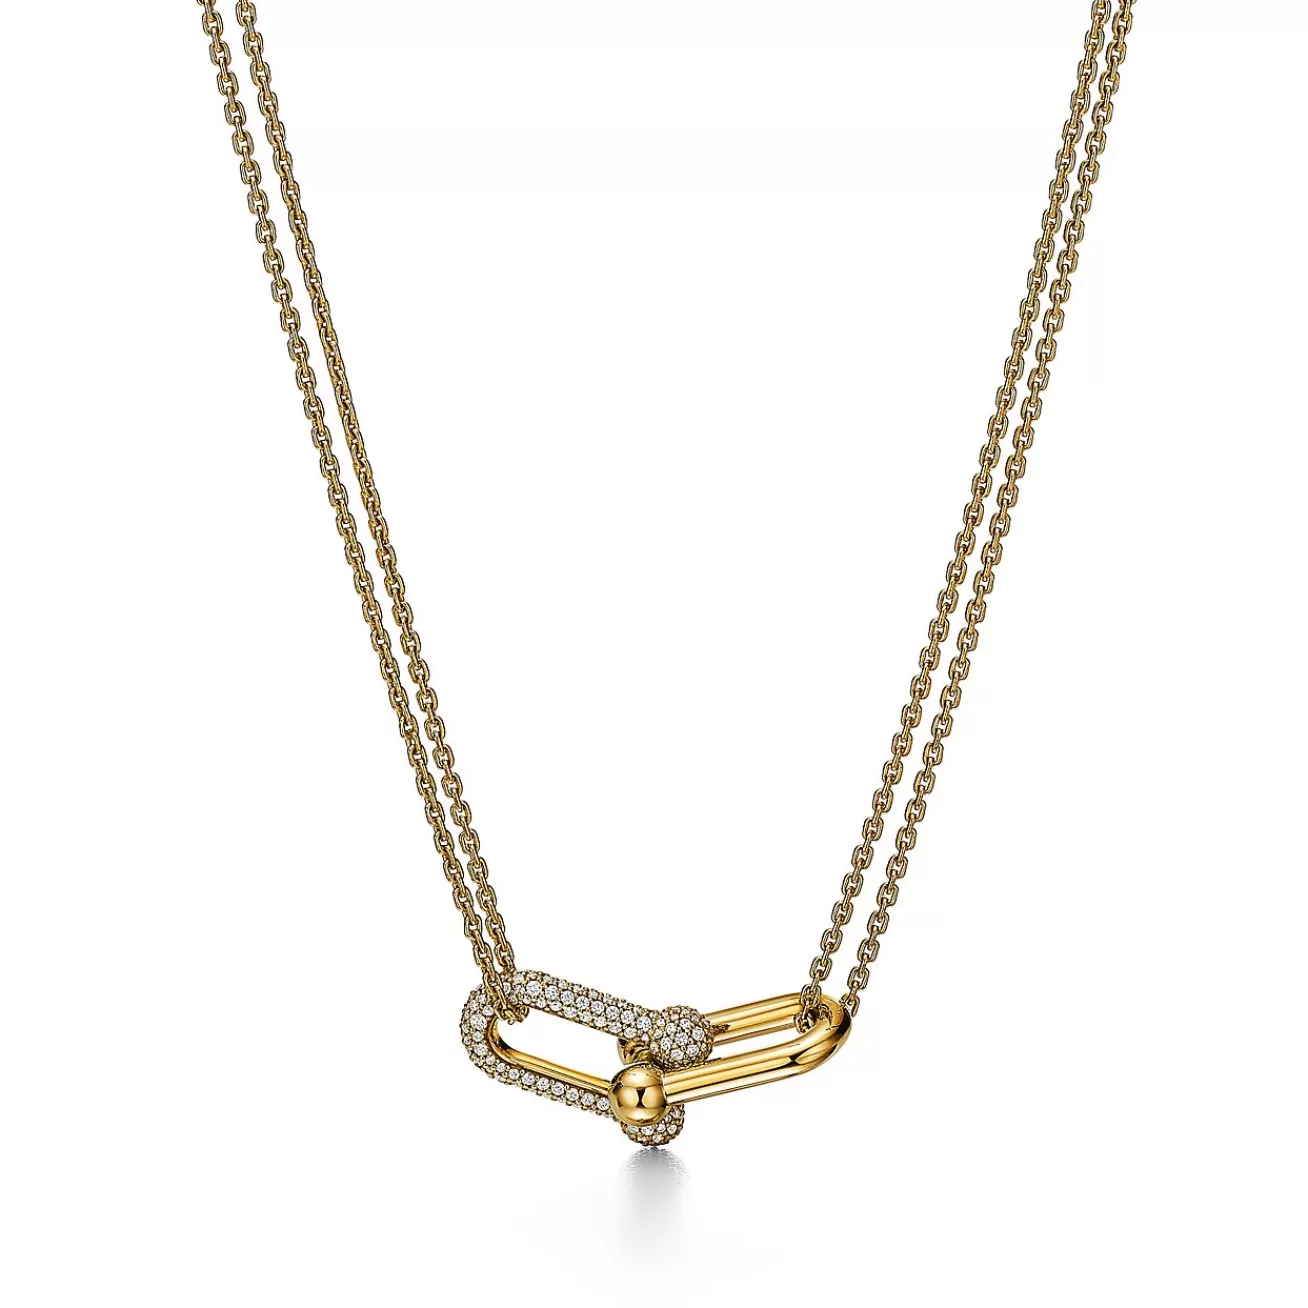 Tiffany & Co. Tiffany HardWear Large Double Link Pendant in Yellow Gold with Pavé Diamonds | ^ Necklaces & Pendants | Gold Jewelry